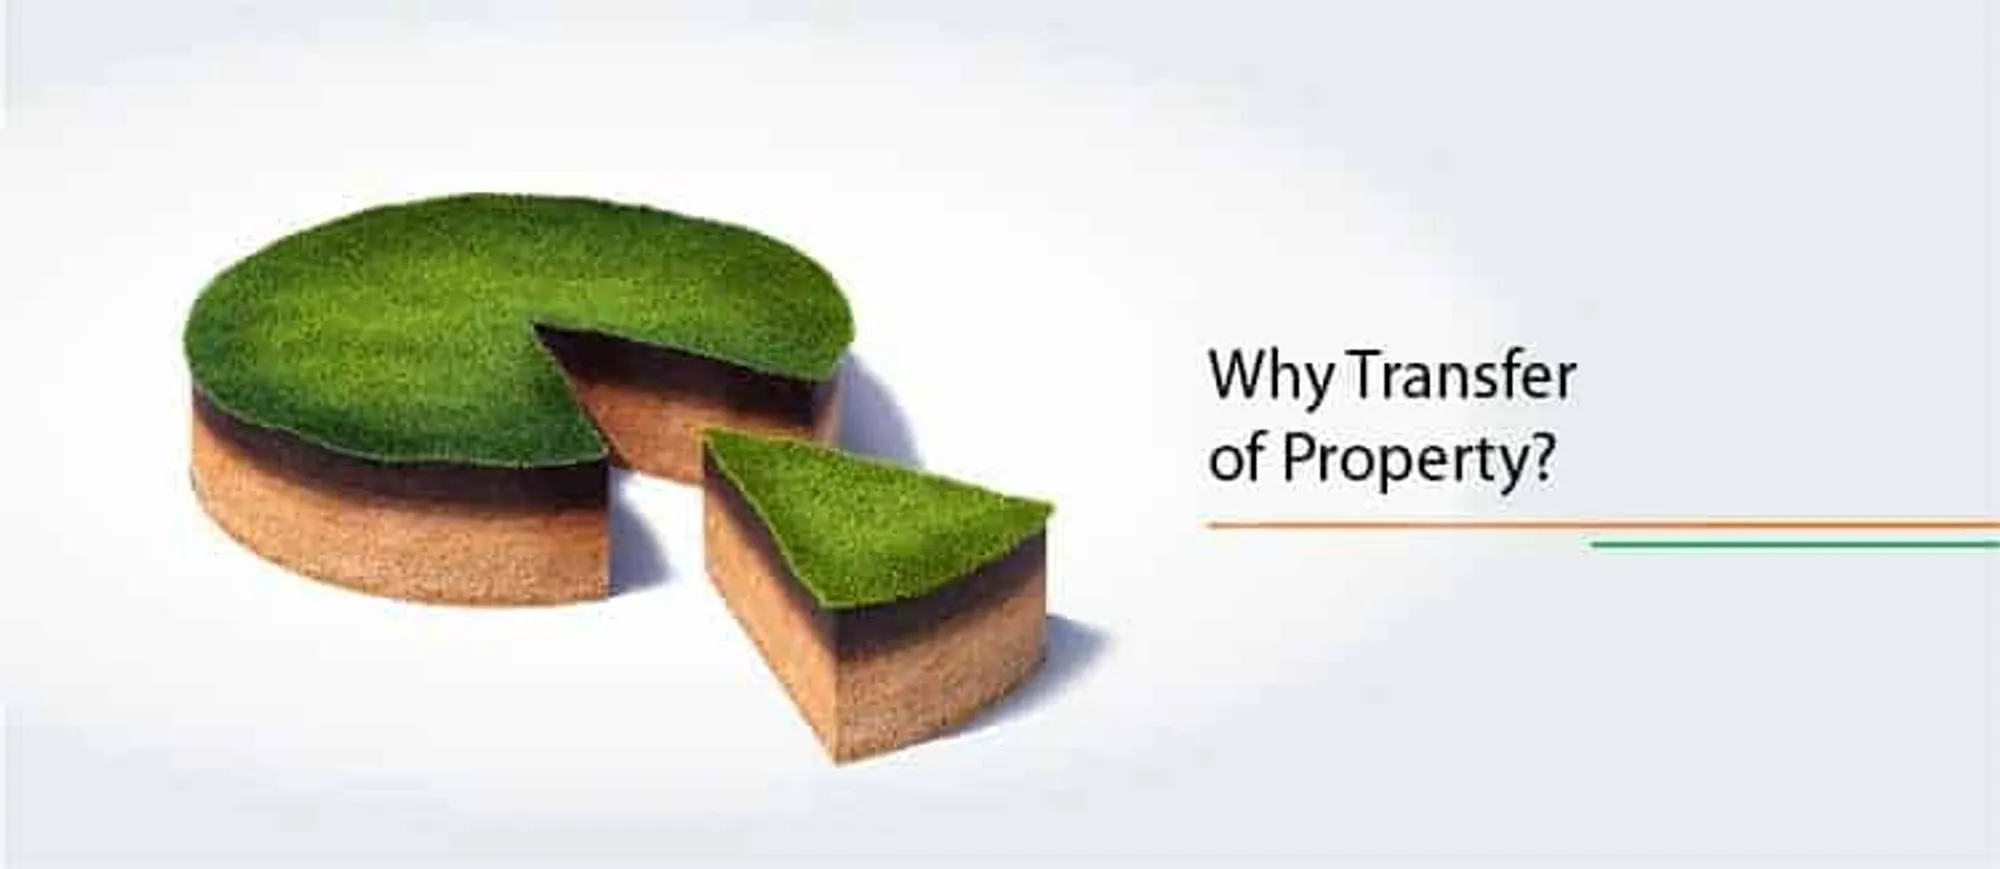 Why transfer of Property